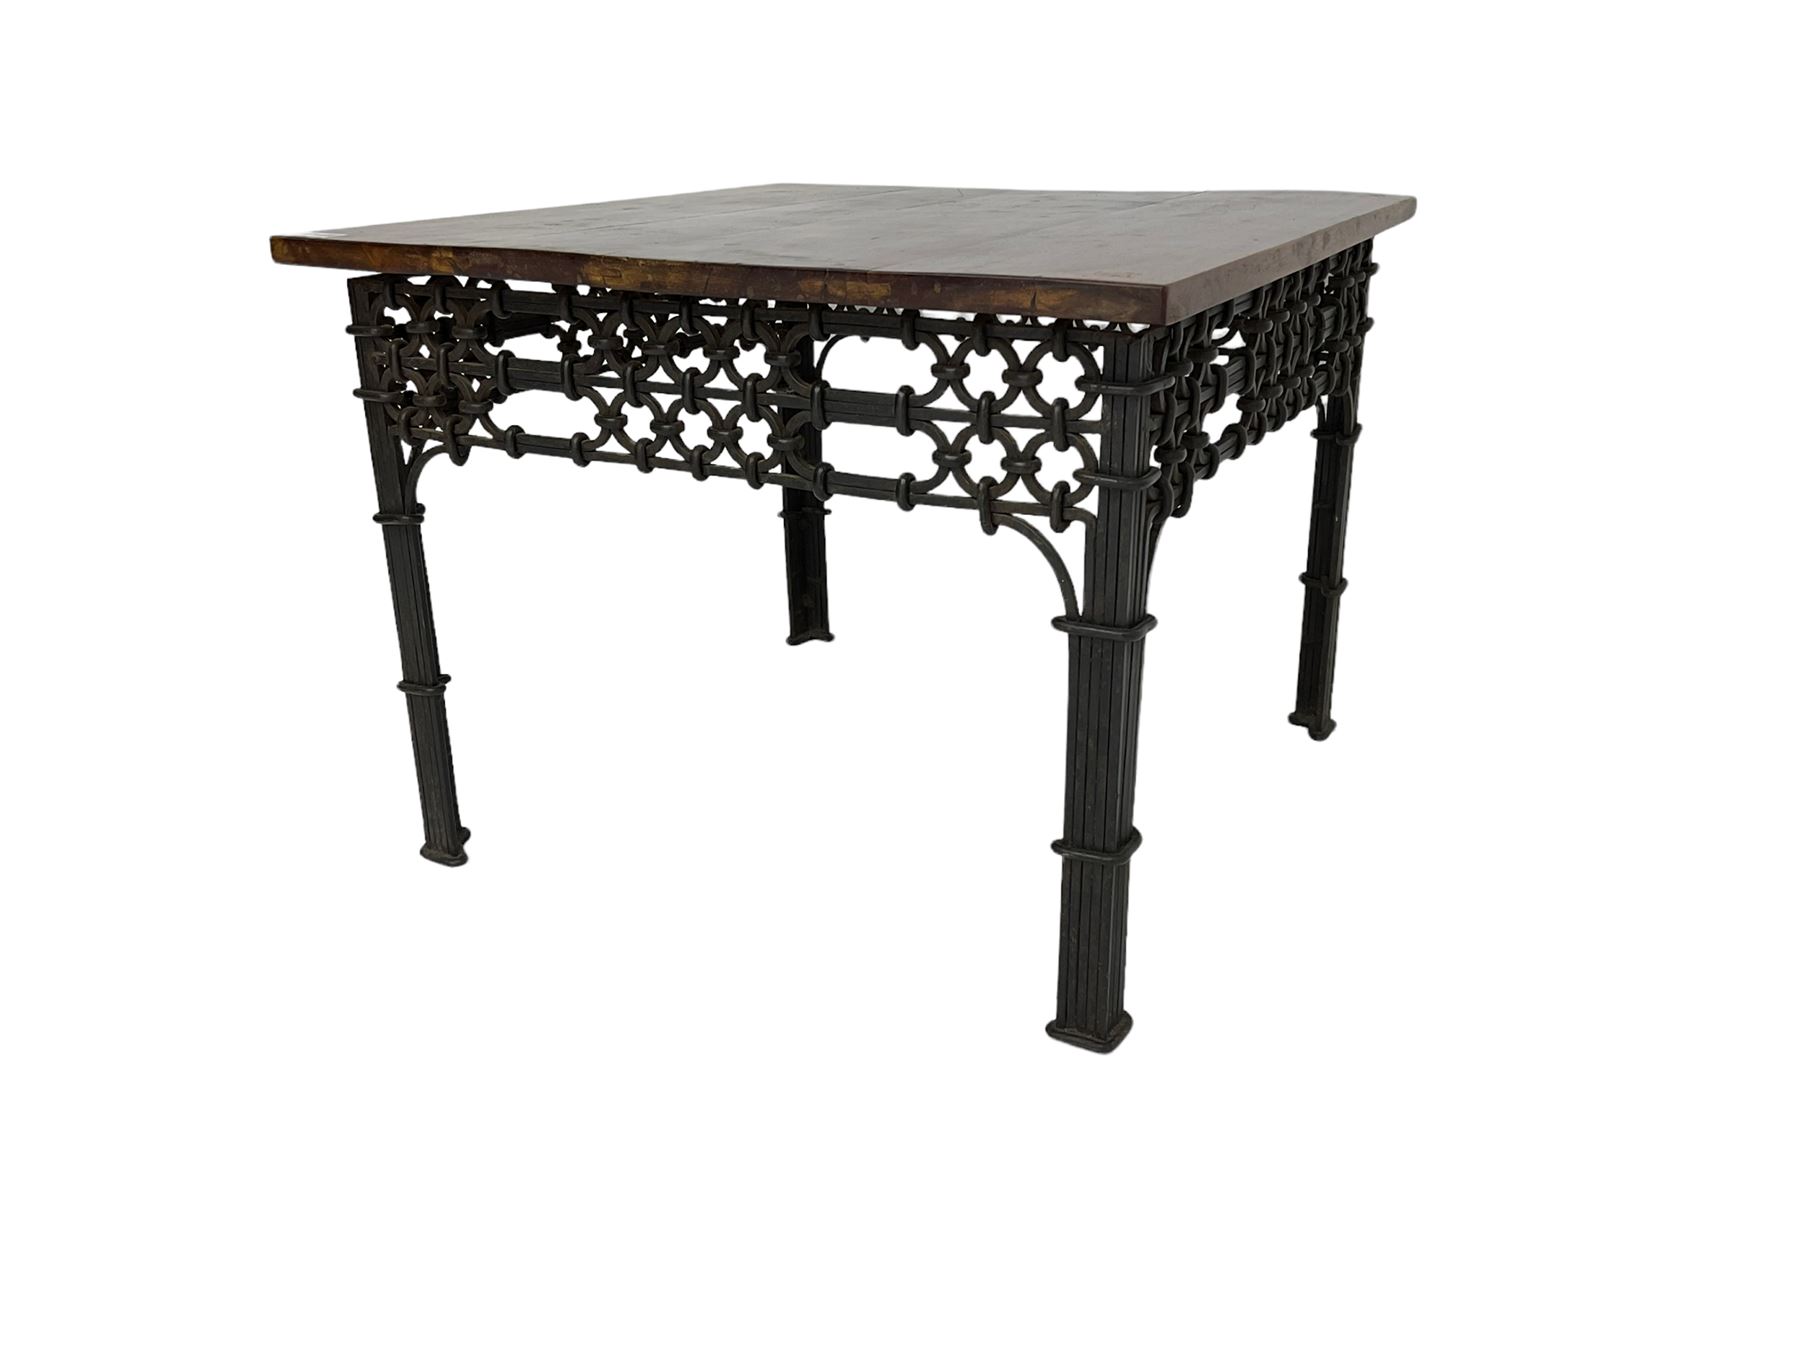 Hardwood and wrought metal coffee or occasional table - Image 6 of 6